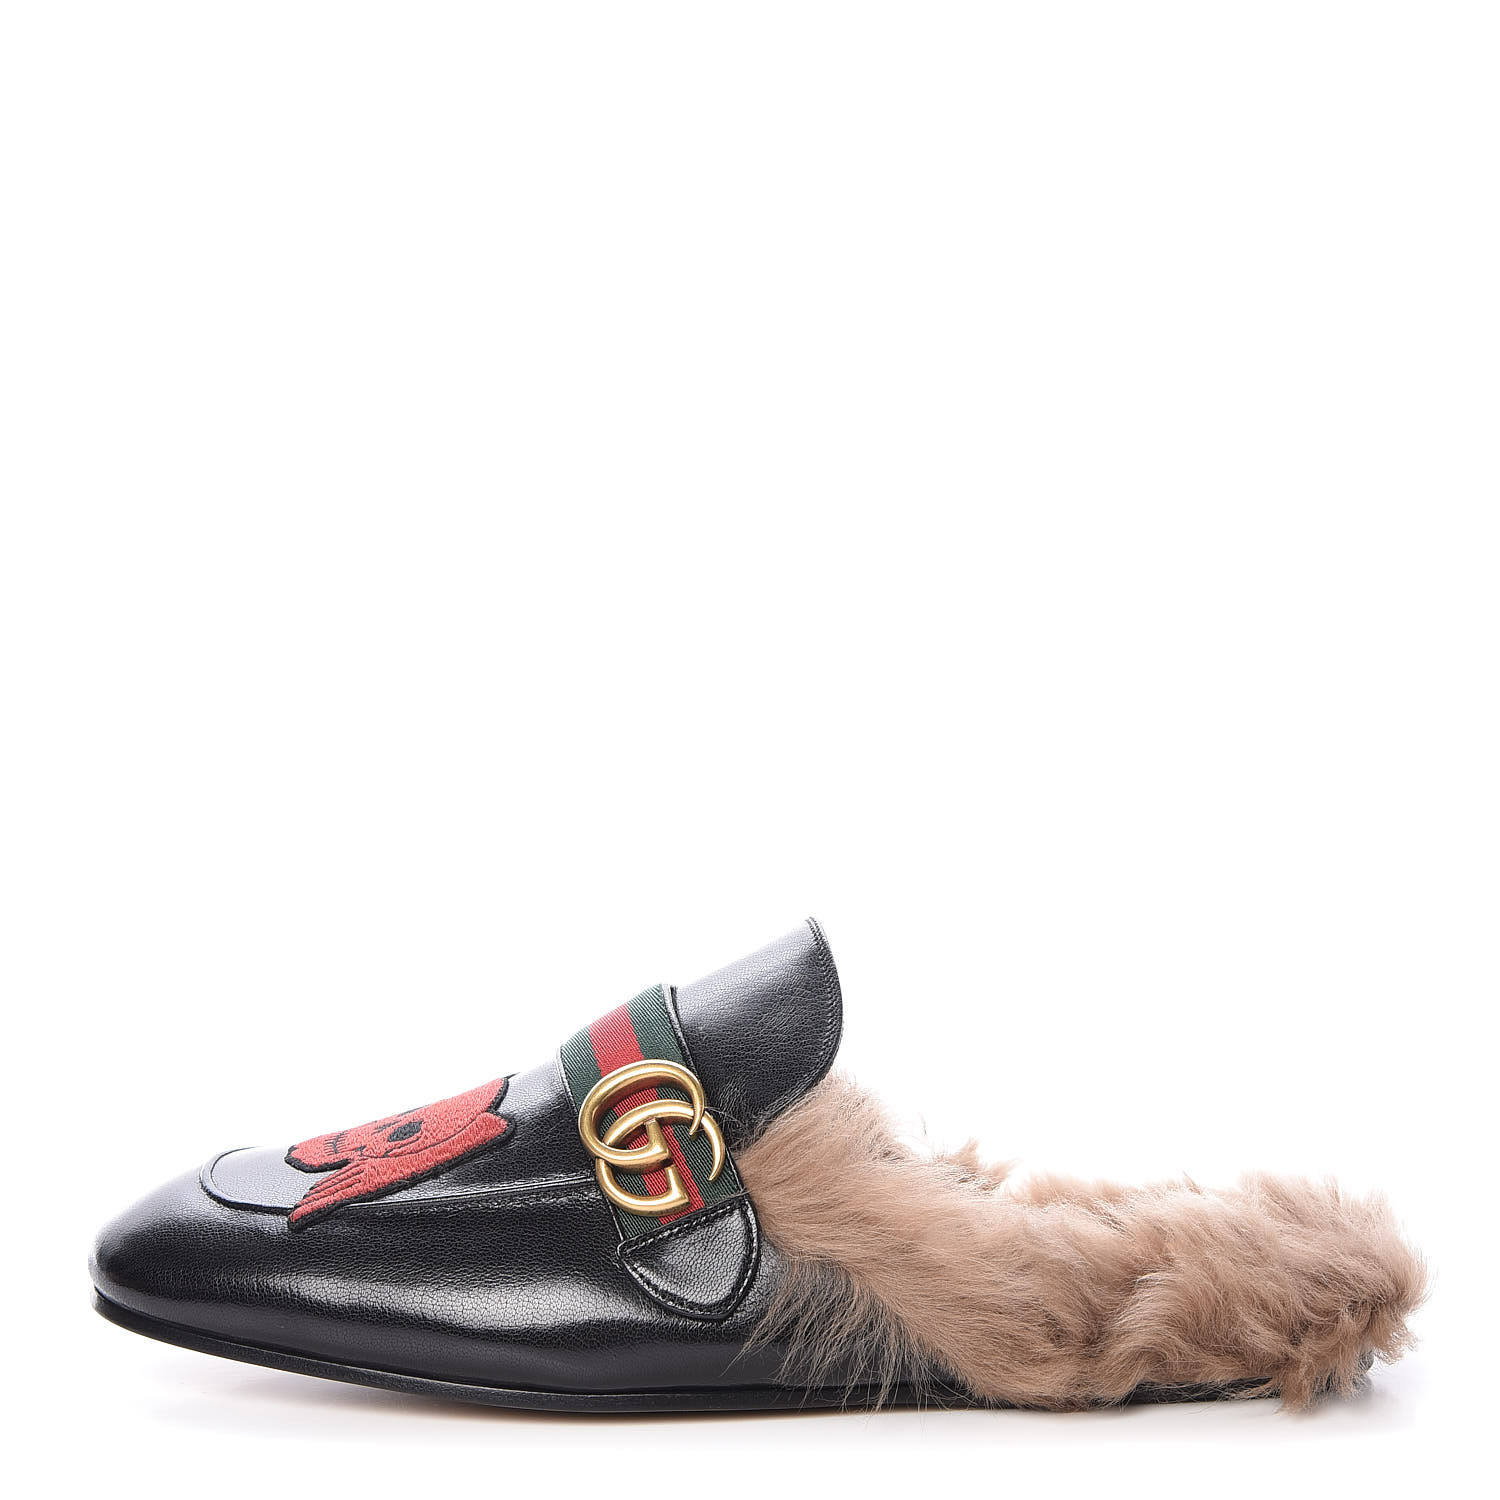 gucci skull shoes